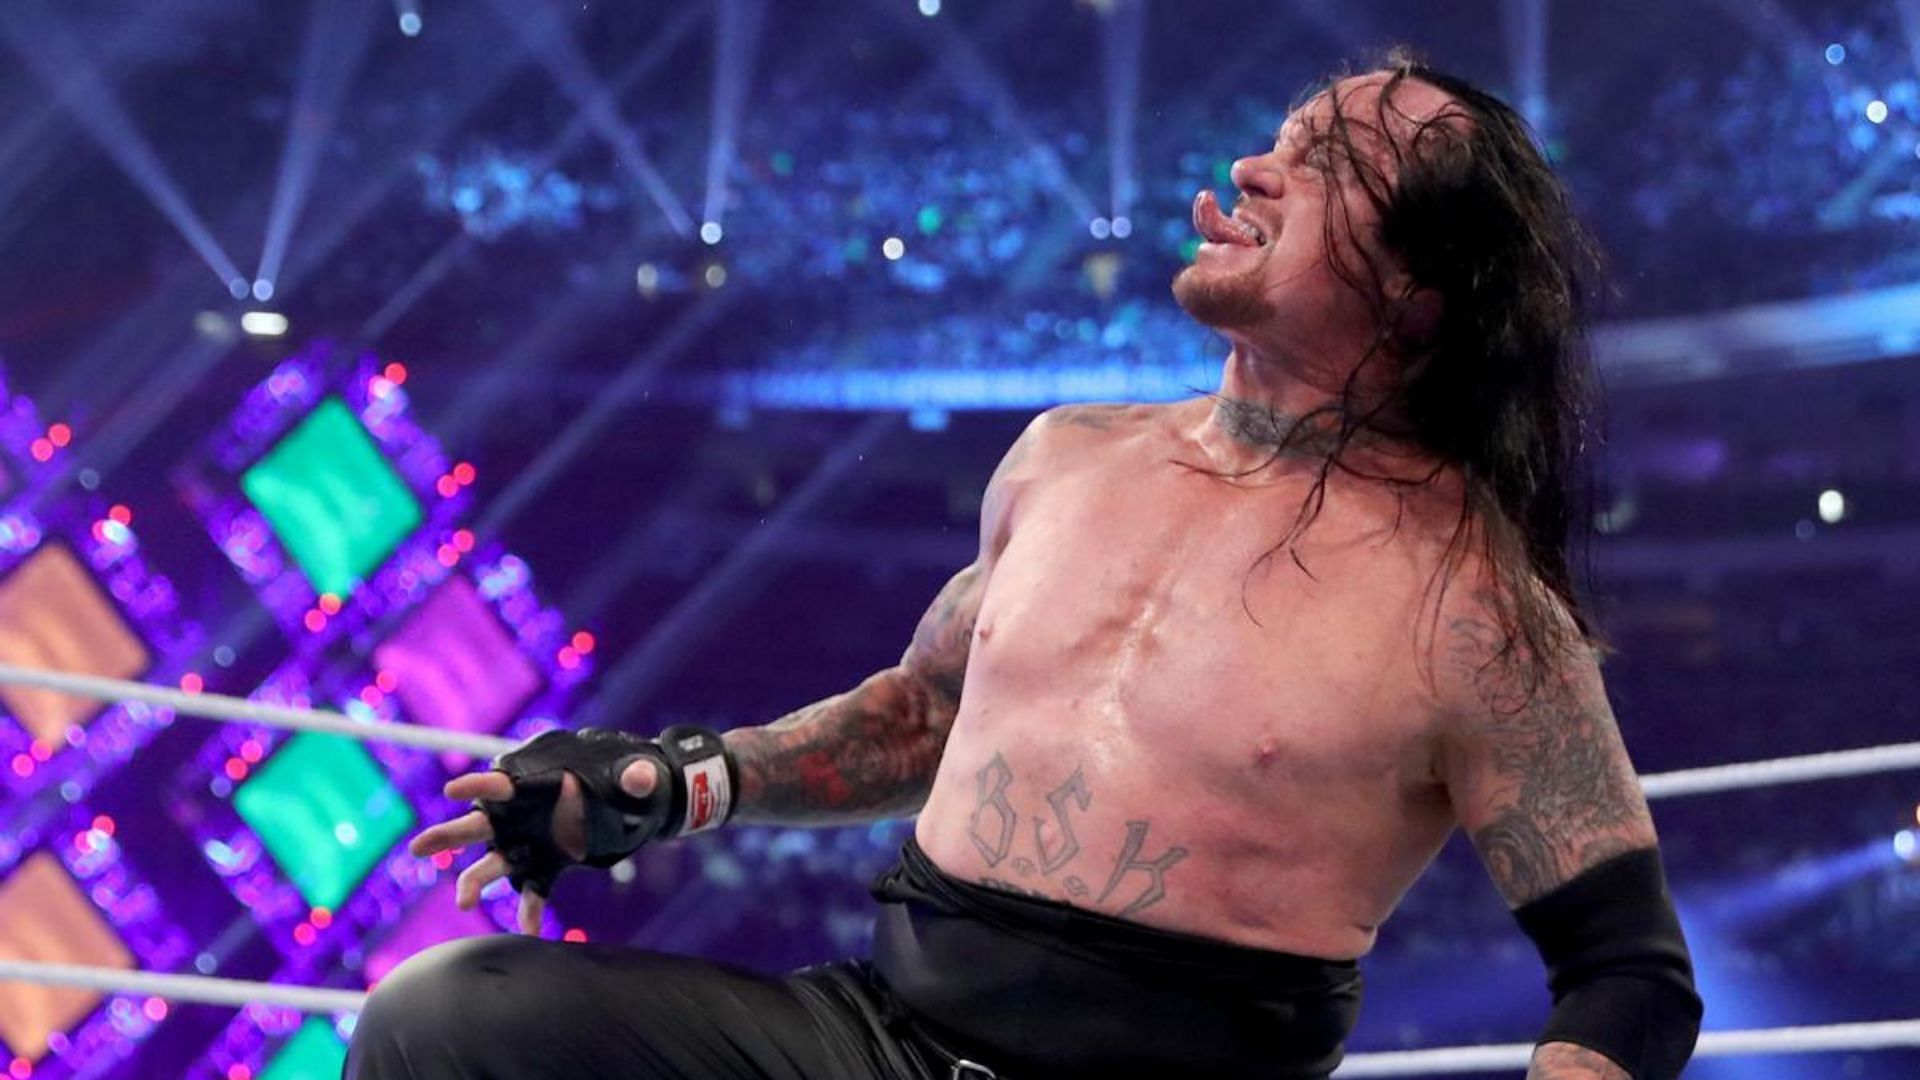 The Undertaker at WrestleMania 34 in 2018